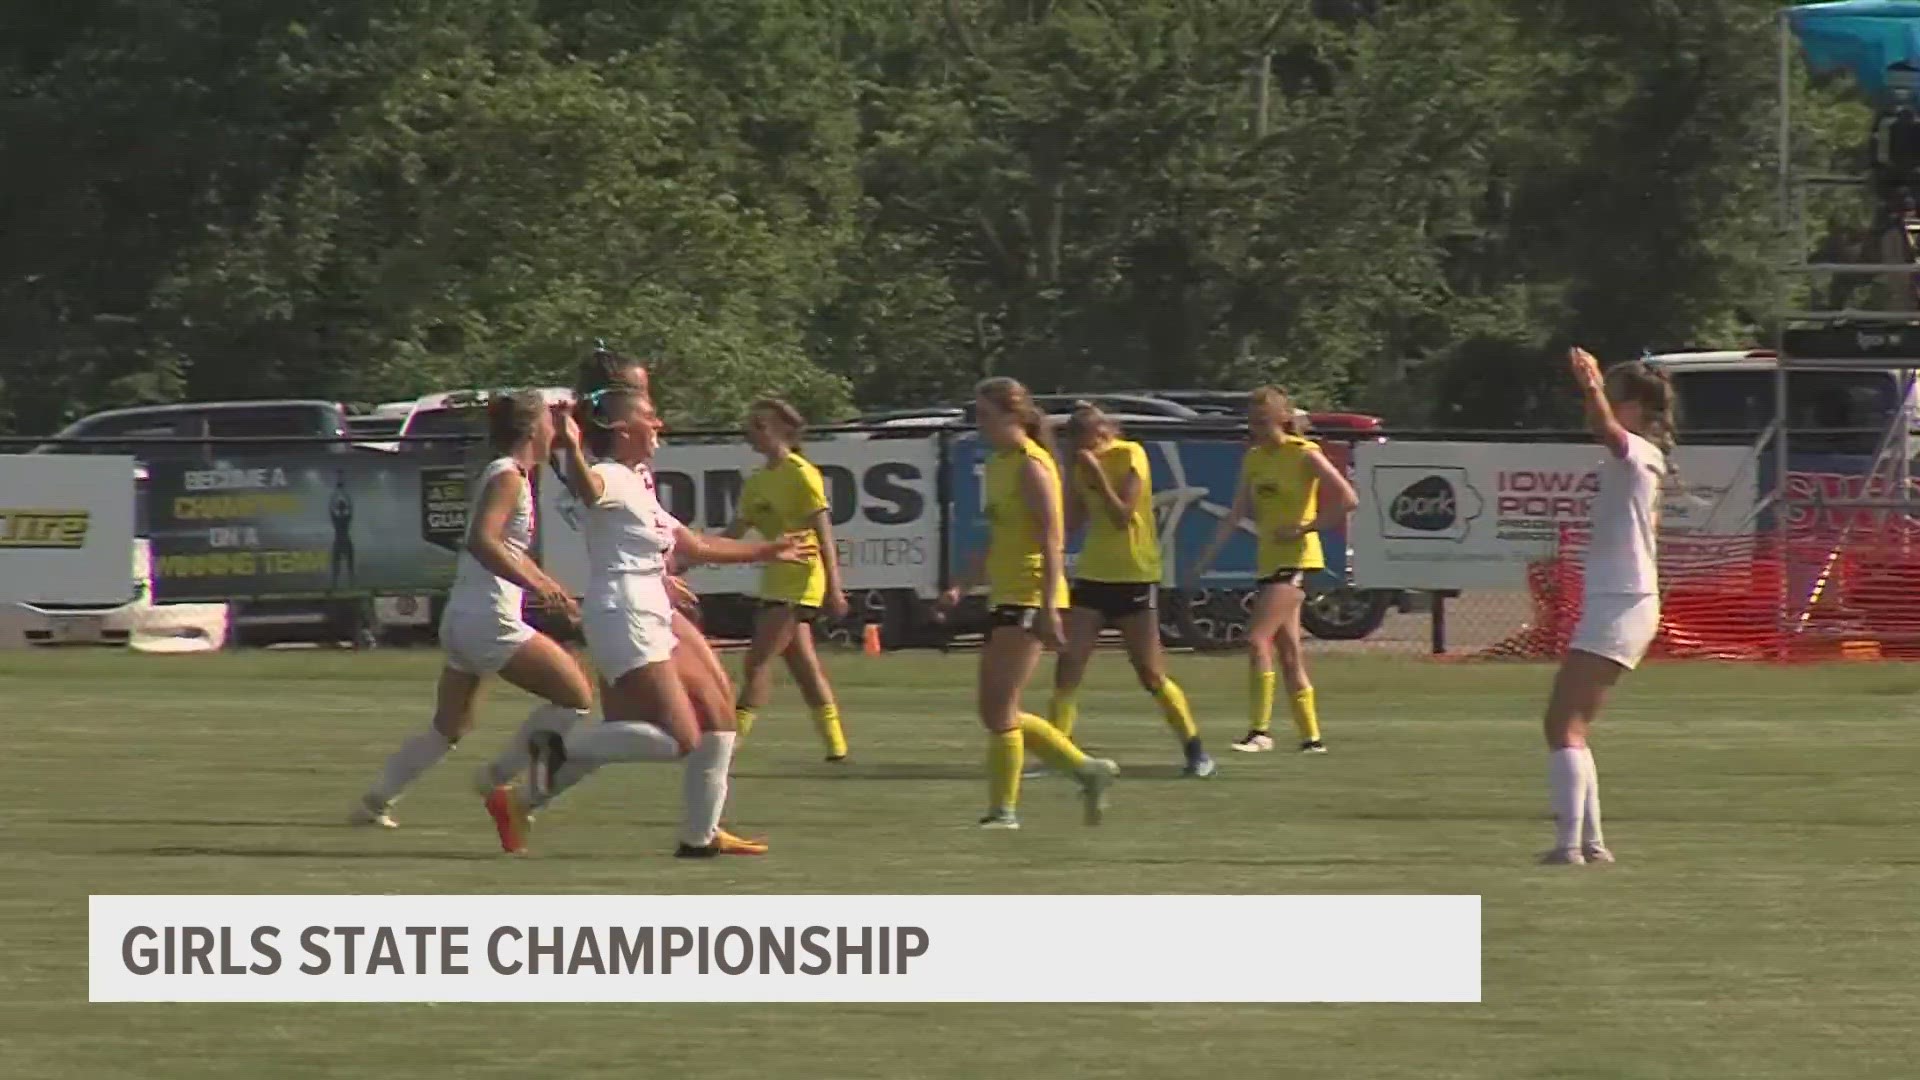 The 2023 IGHSAU state soccer tournament is taking place at Cownie Soccer Complex from May 31 through June 3.